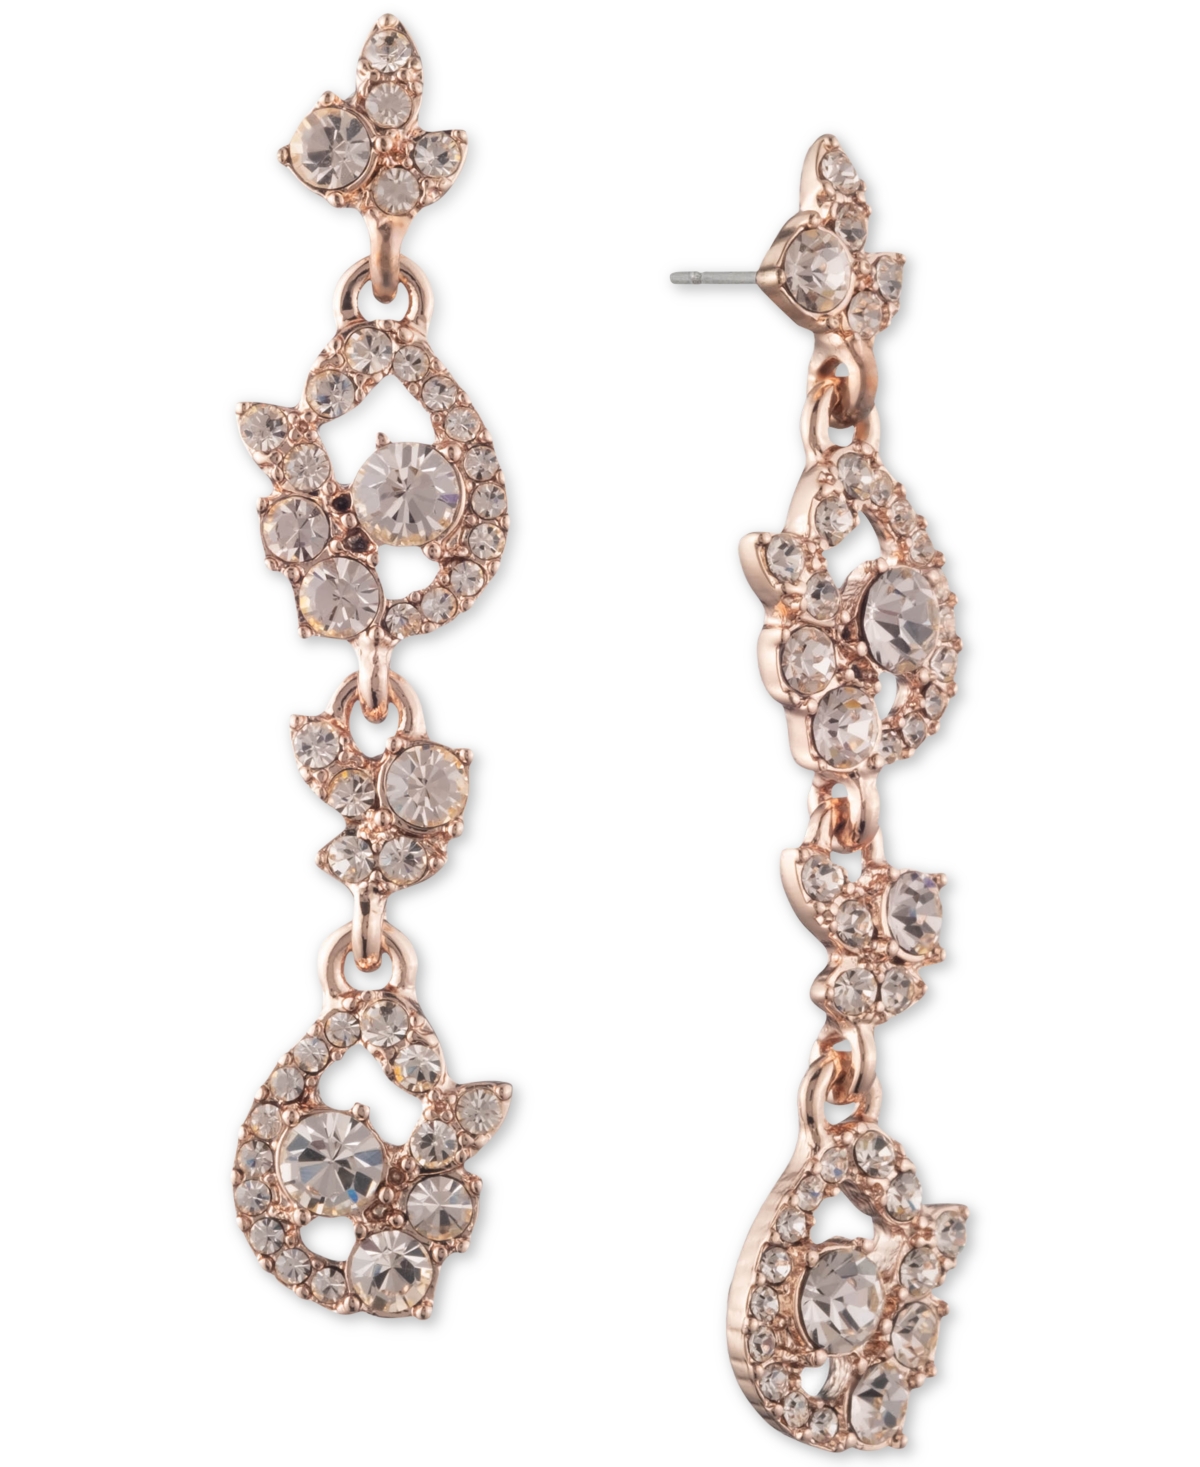 GIVENCHY ROSE GOLD TONE CRYSTAL OPENWORK CLUSTER DROP EARRINGS